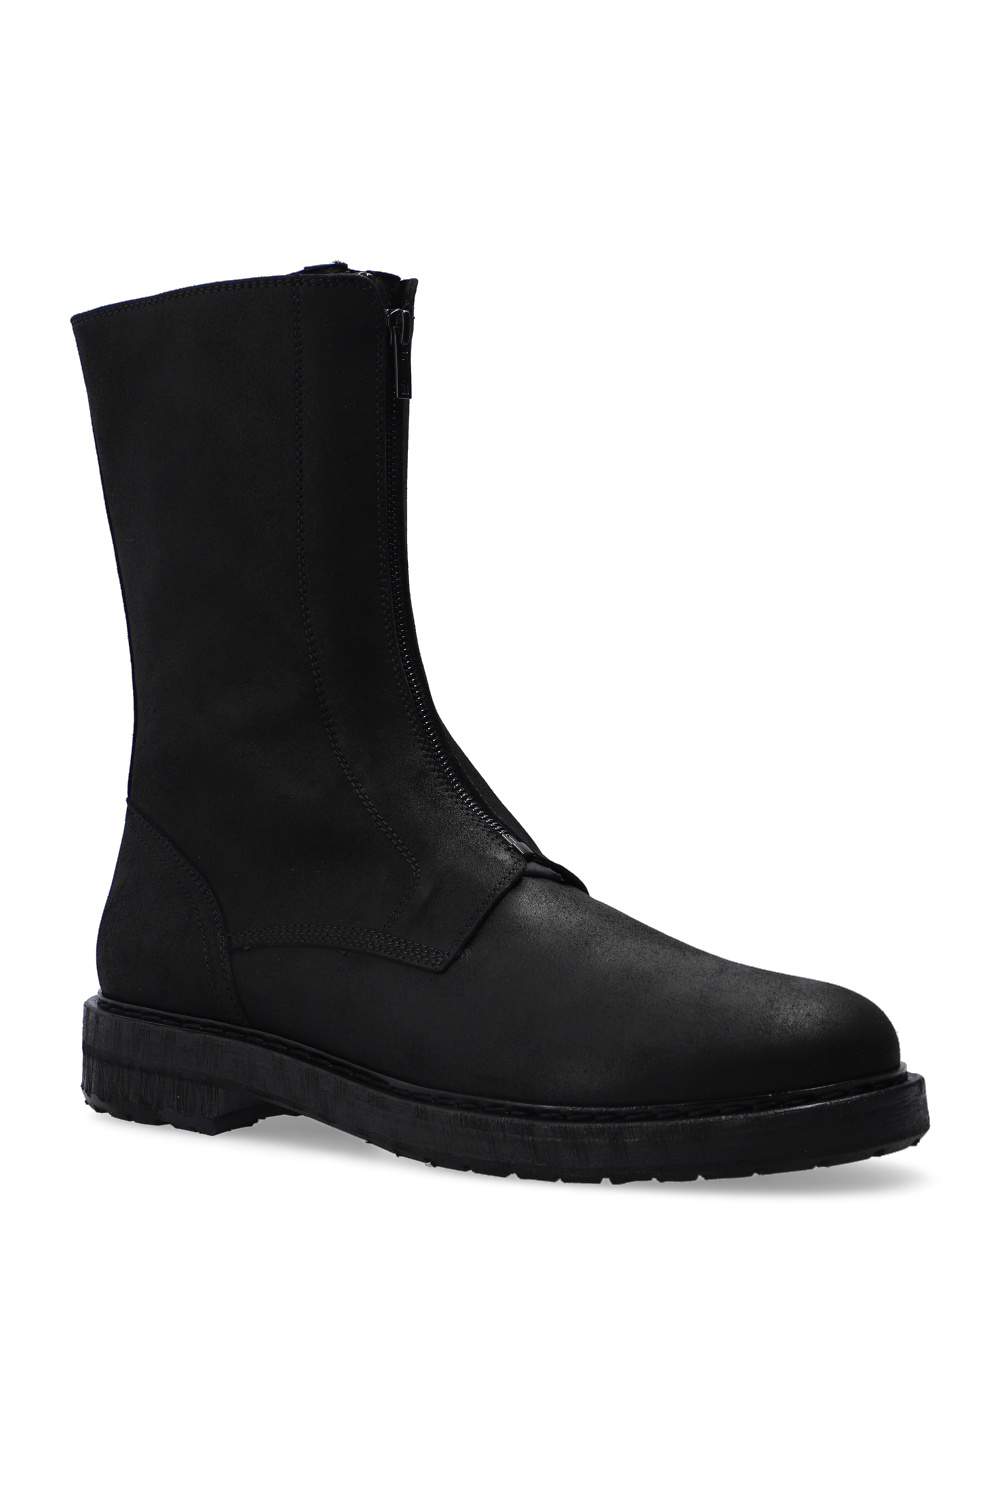 ANN DEMEULEMEESTER WILLY ANKLE BOOTS 43 - ブーツ